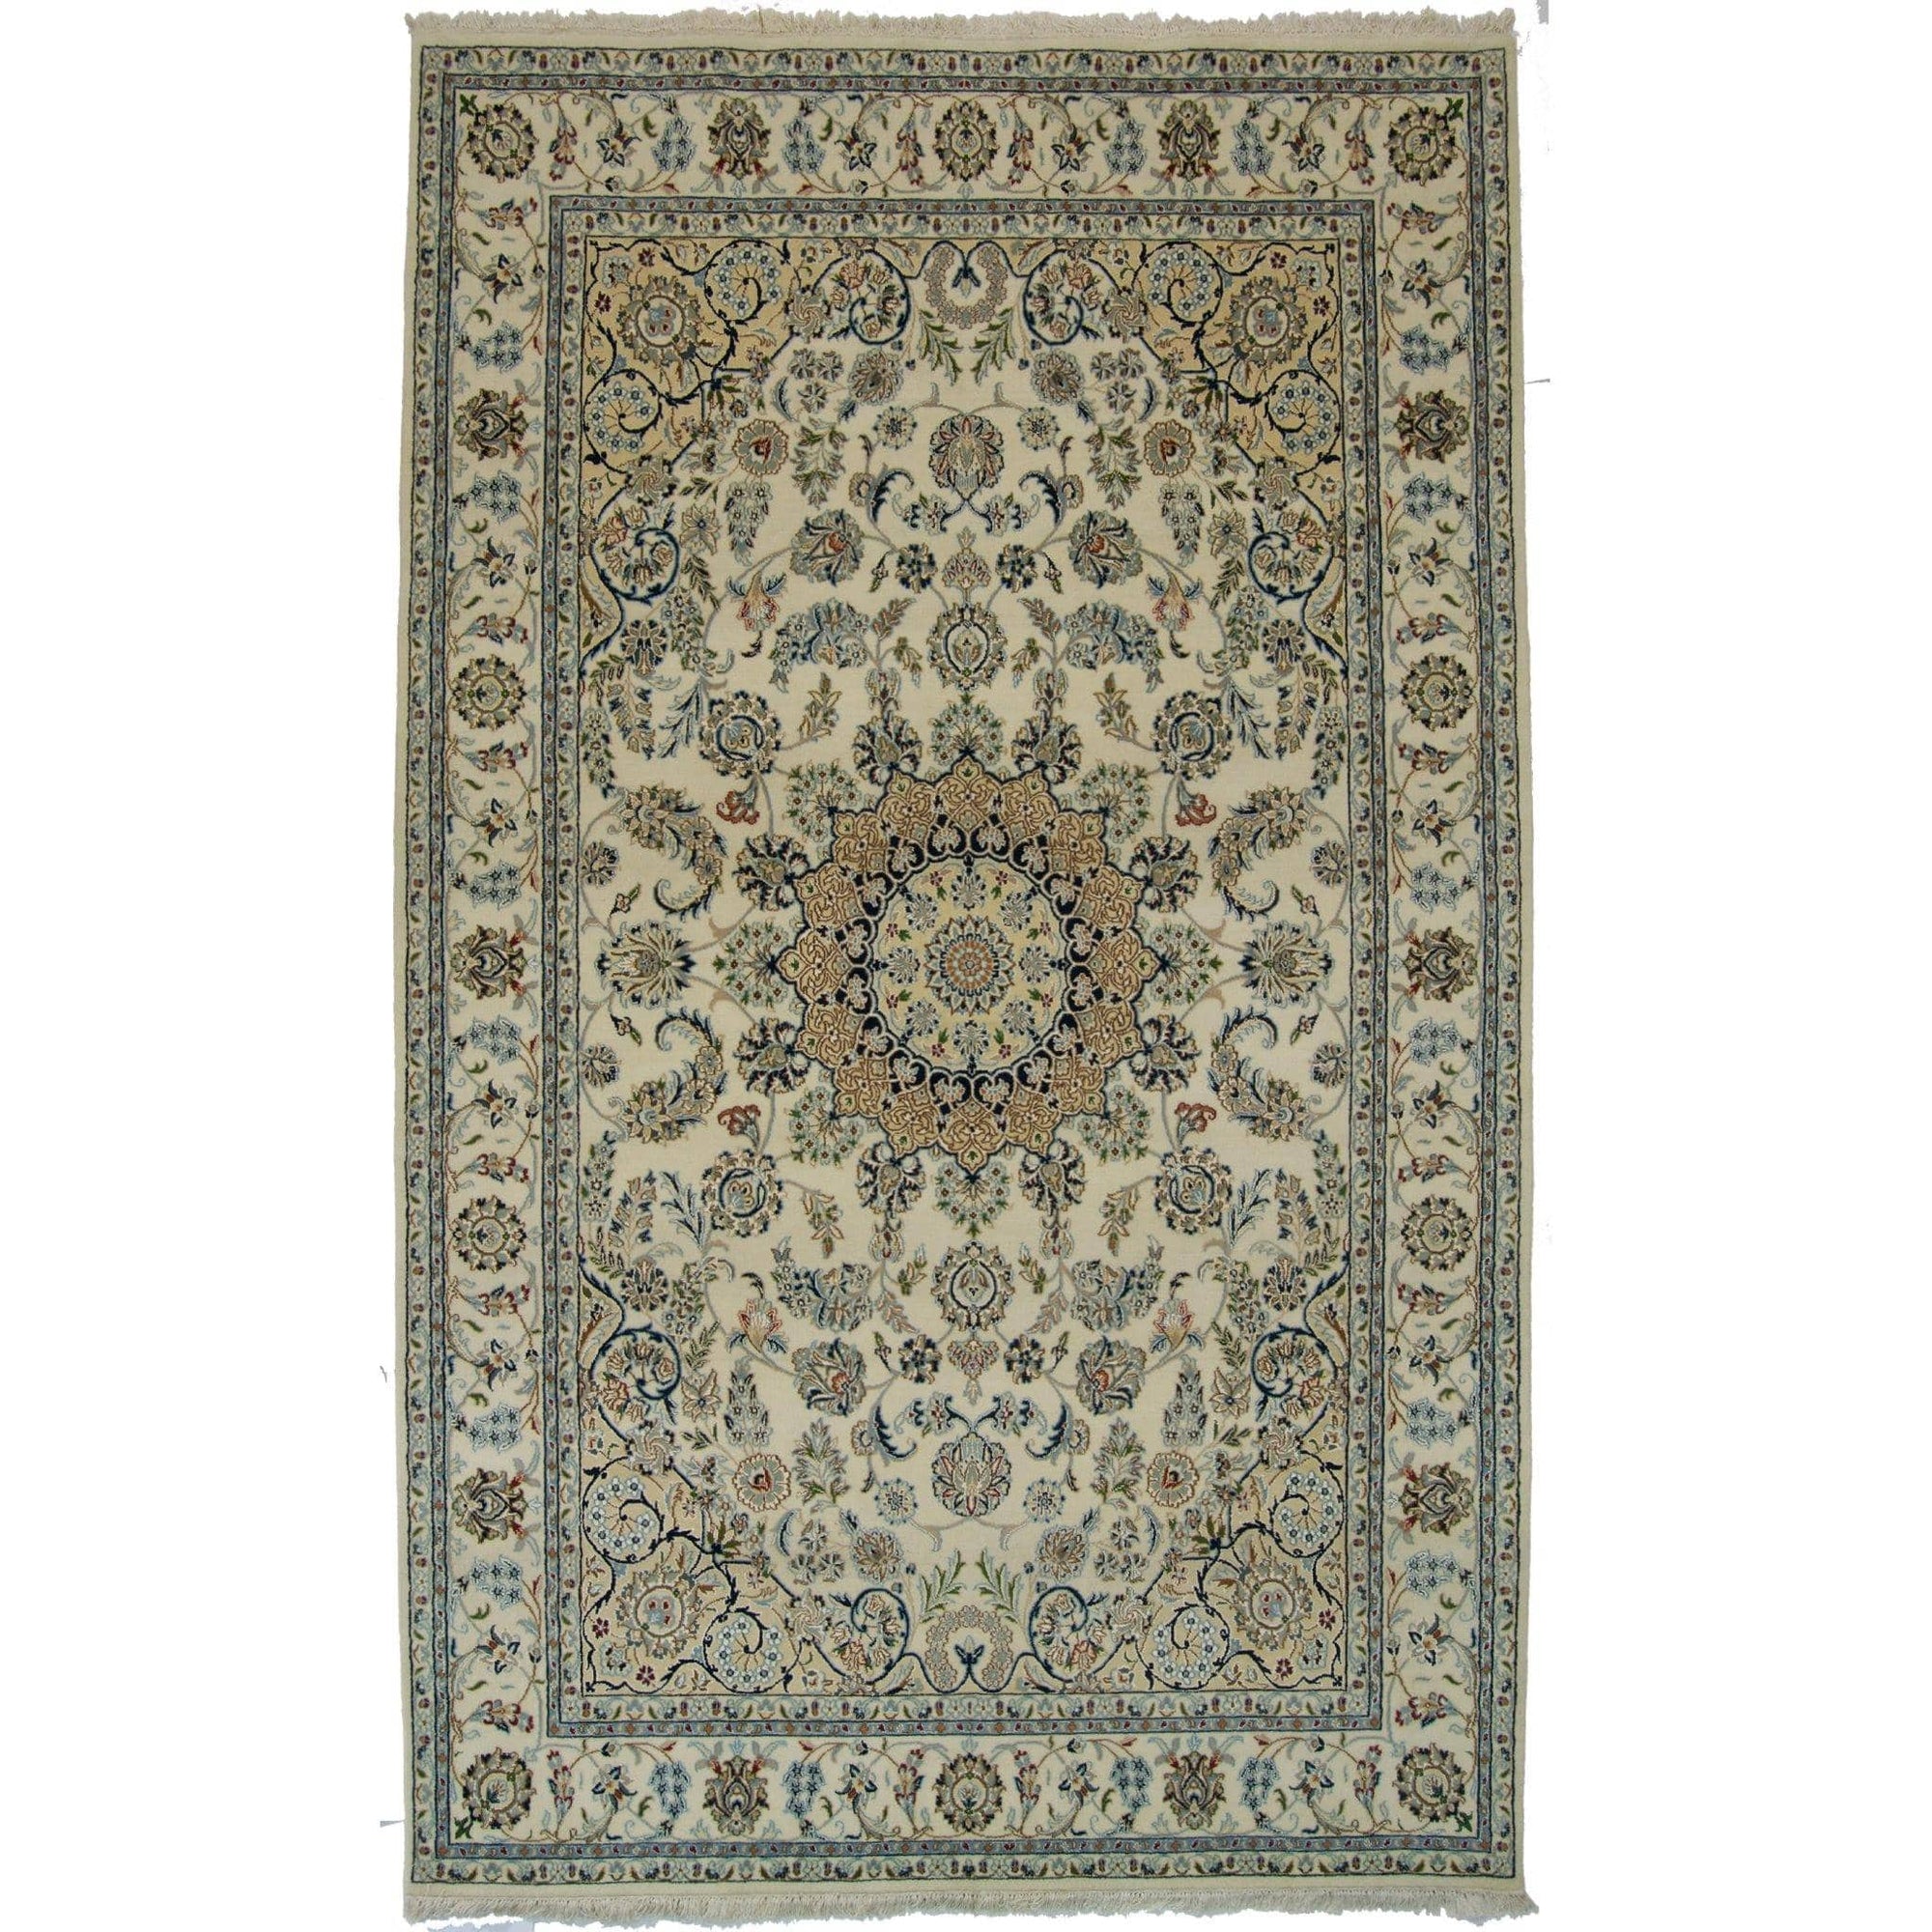 Fine Hand-knotted Wool & Silk Nain Rug 166cm x 246cm